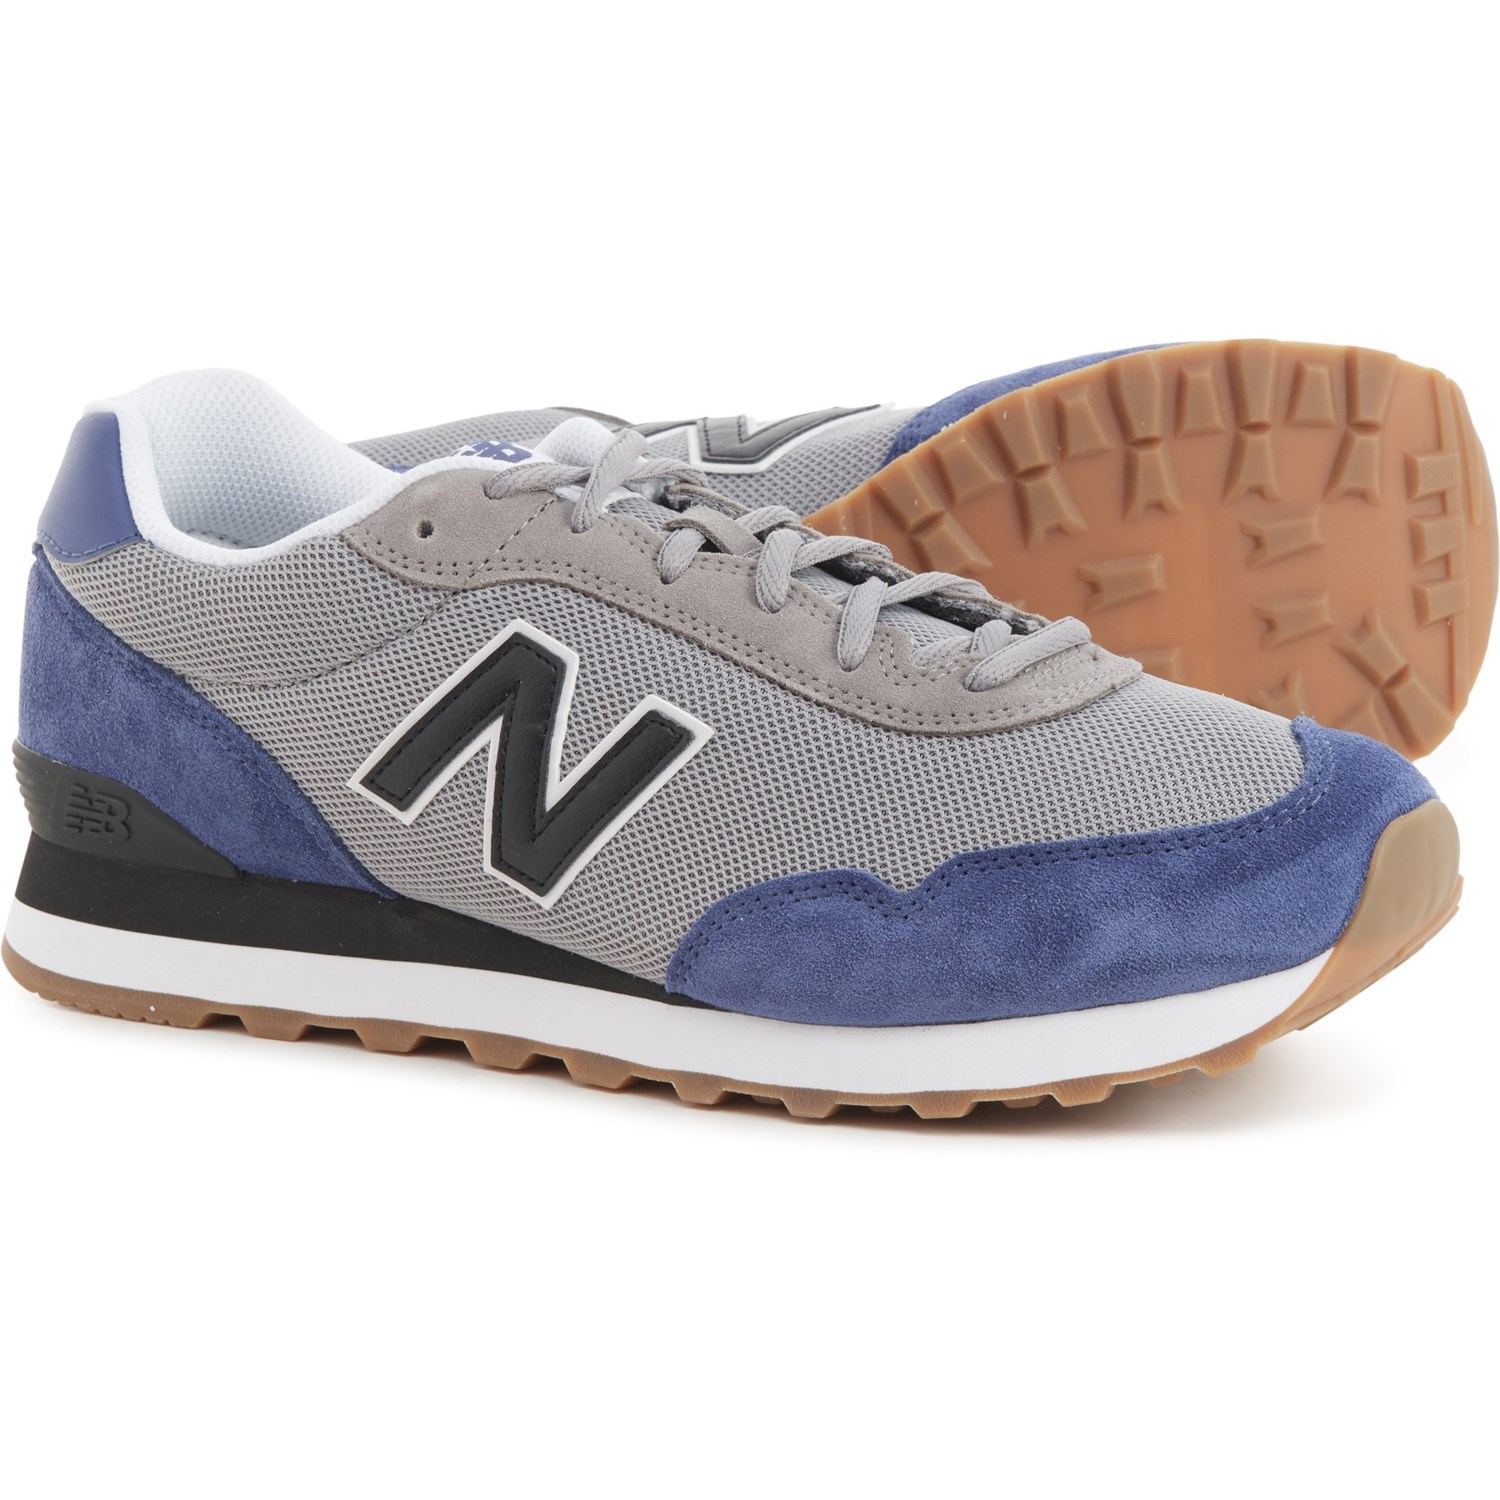 New Balance 515 Sneakers (For Men)